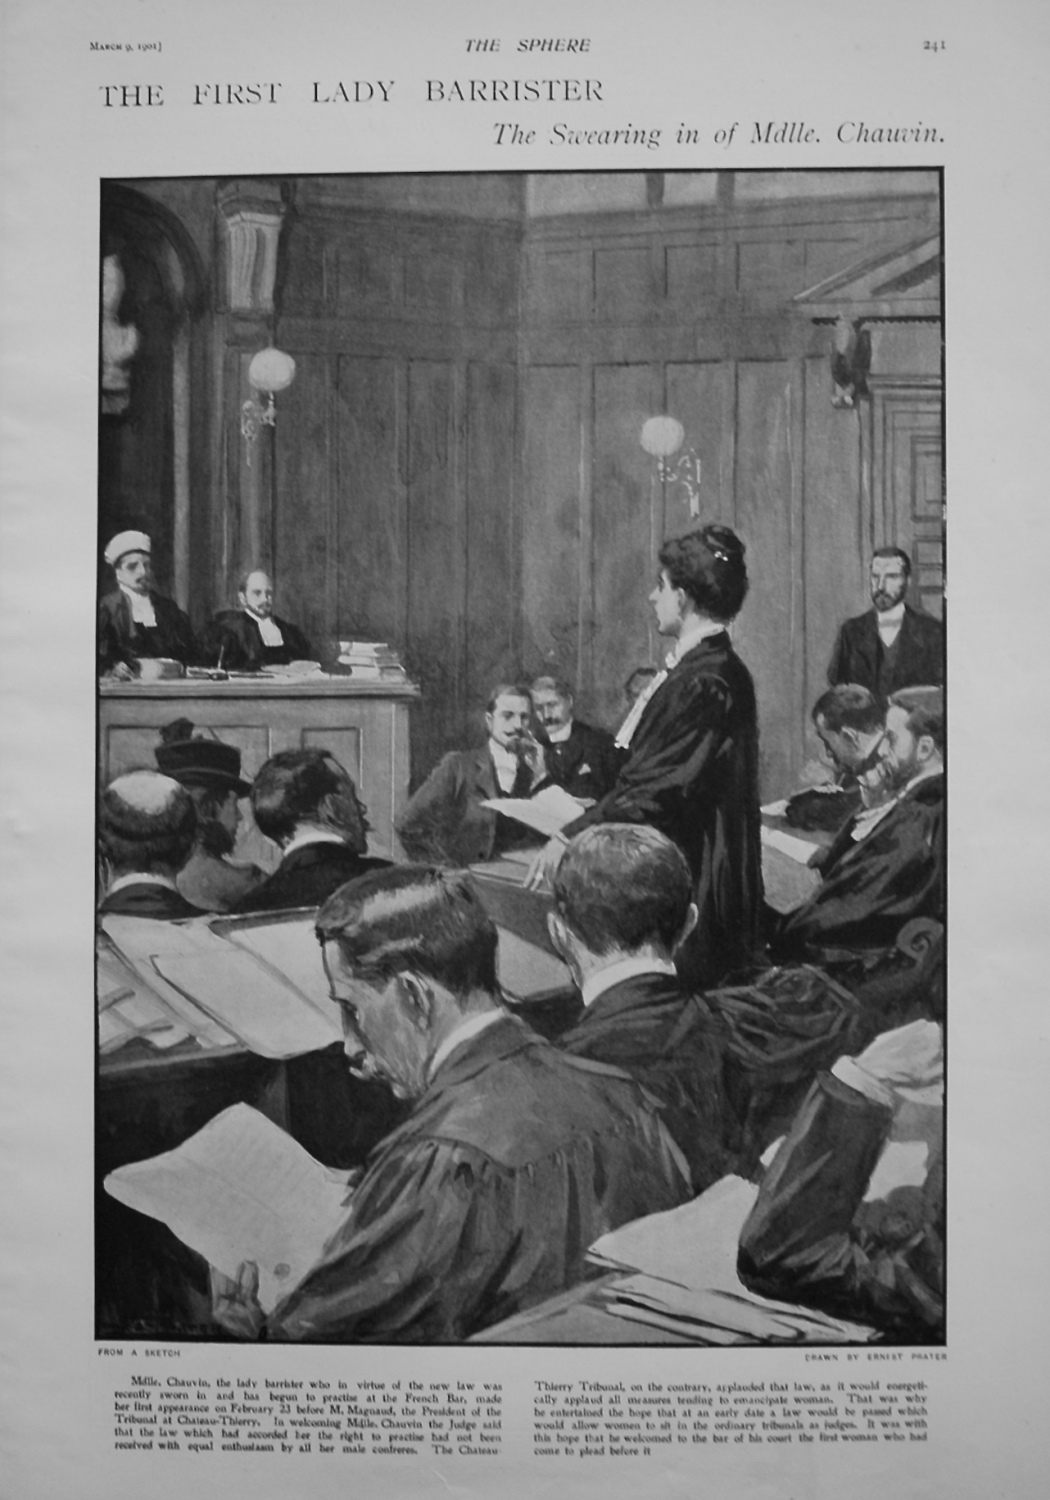 First Lady Barrister, the Swearing in of Mdlle. Chauvin. 1901